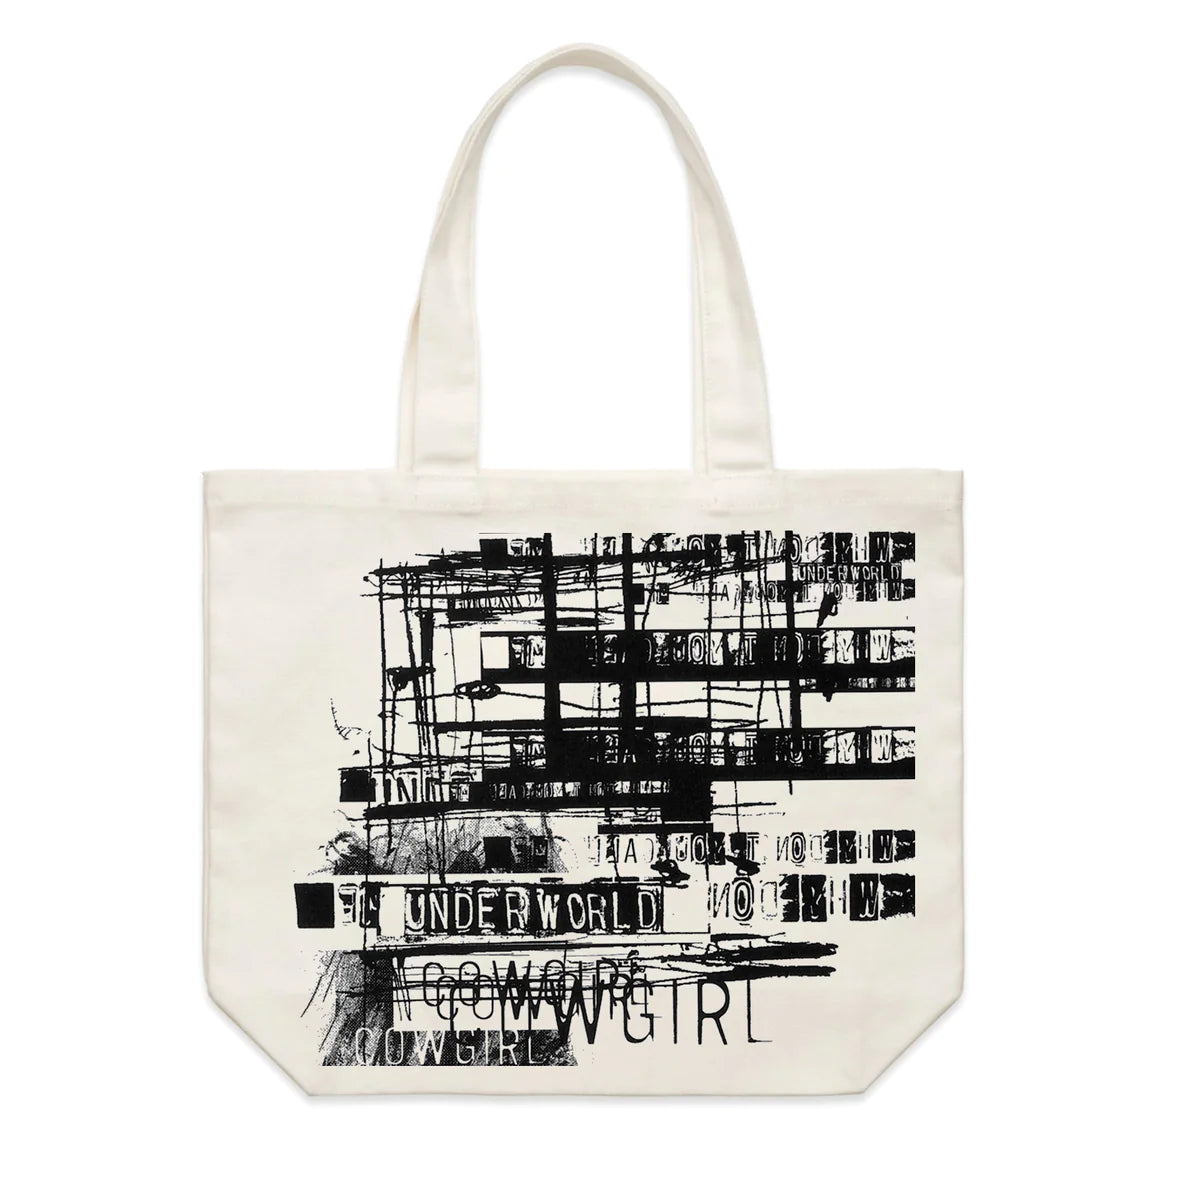 Underworld - *Cowgirl Limited Drop* Tote Bag